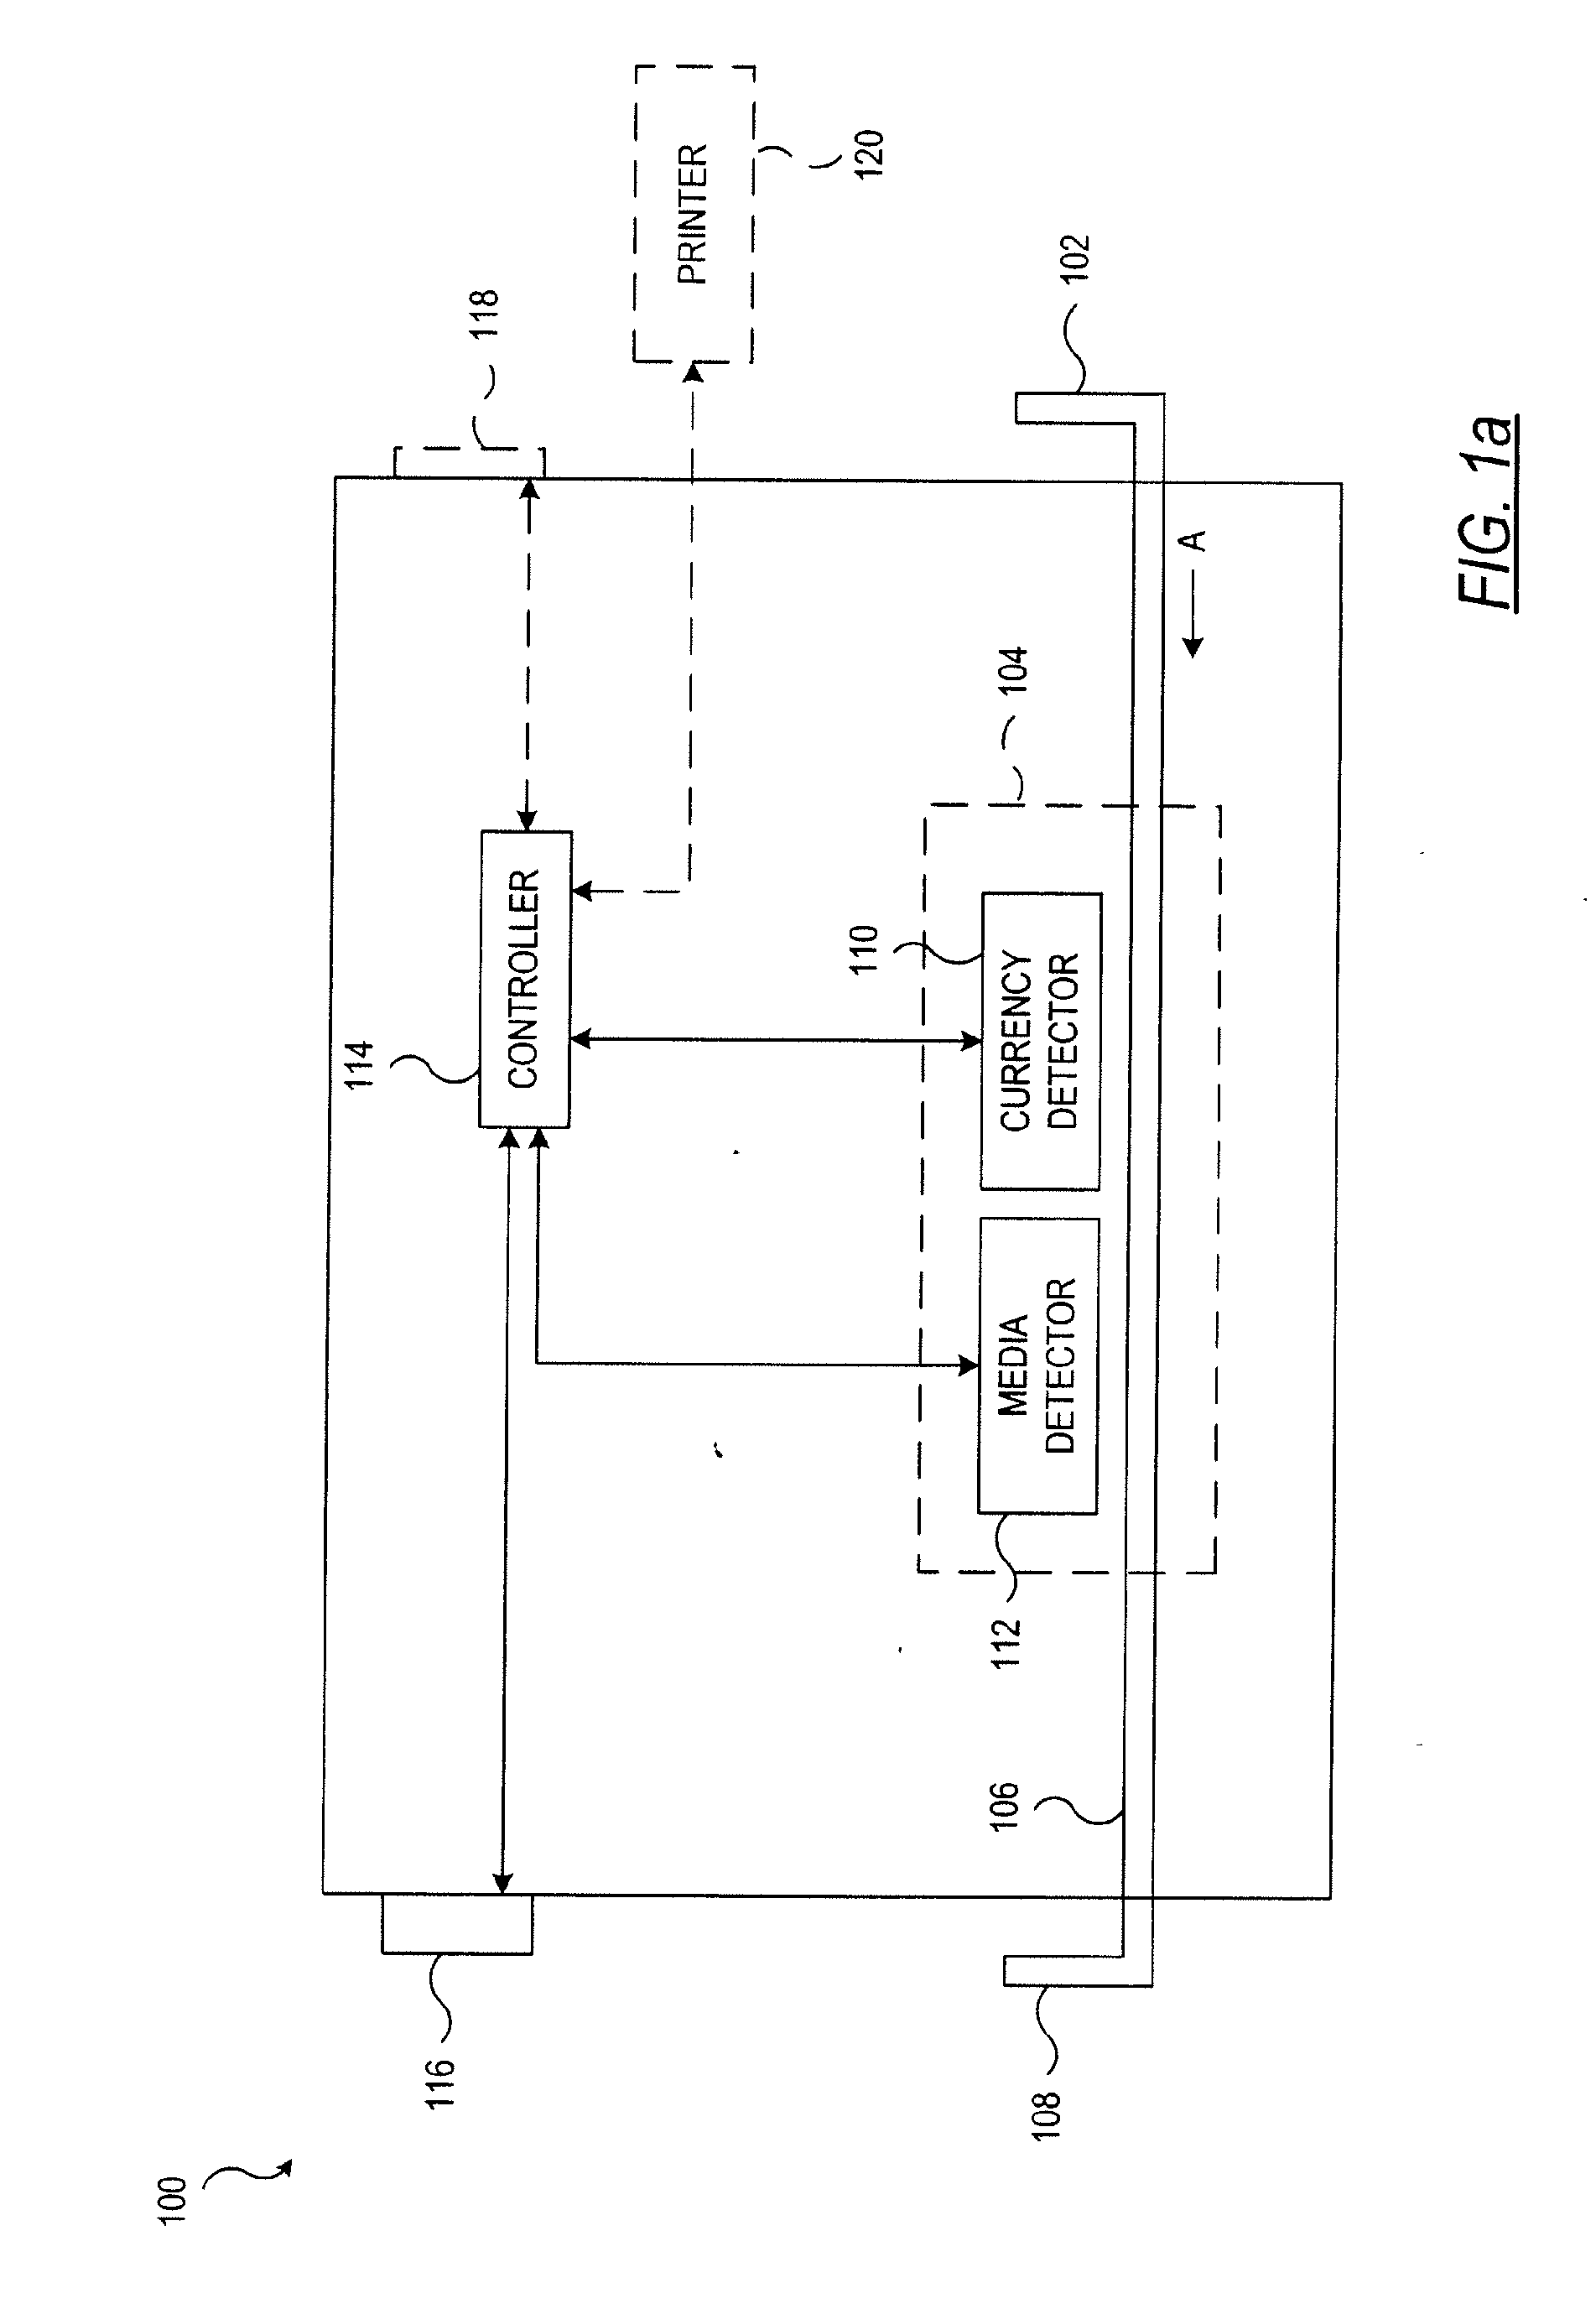 System and method for processing batches of documents